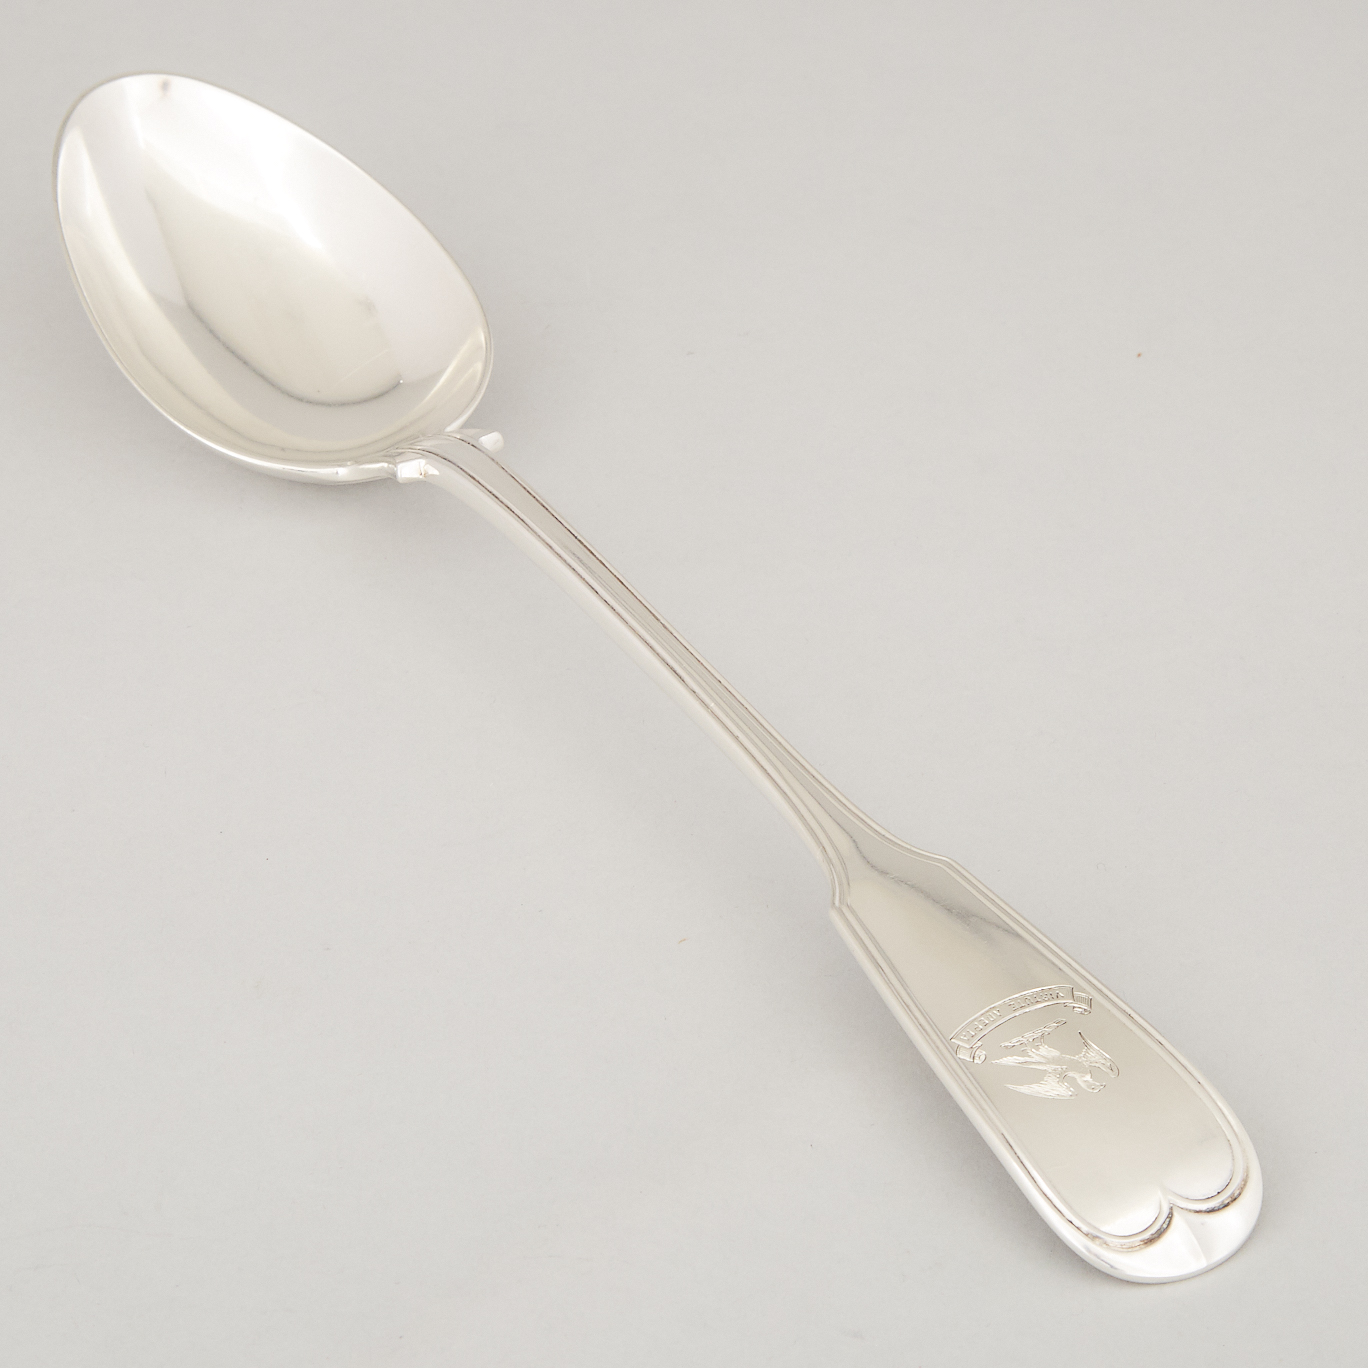 Canadian Silver Fiddle and Thread Pattern Serving Spoon, J.G. Joseph & Co., Toronto, Ont., c.1857-77